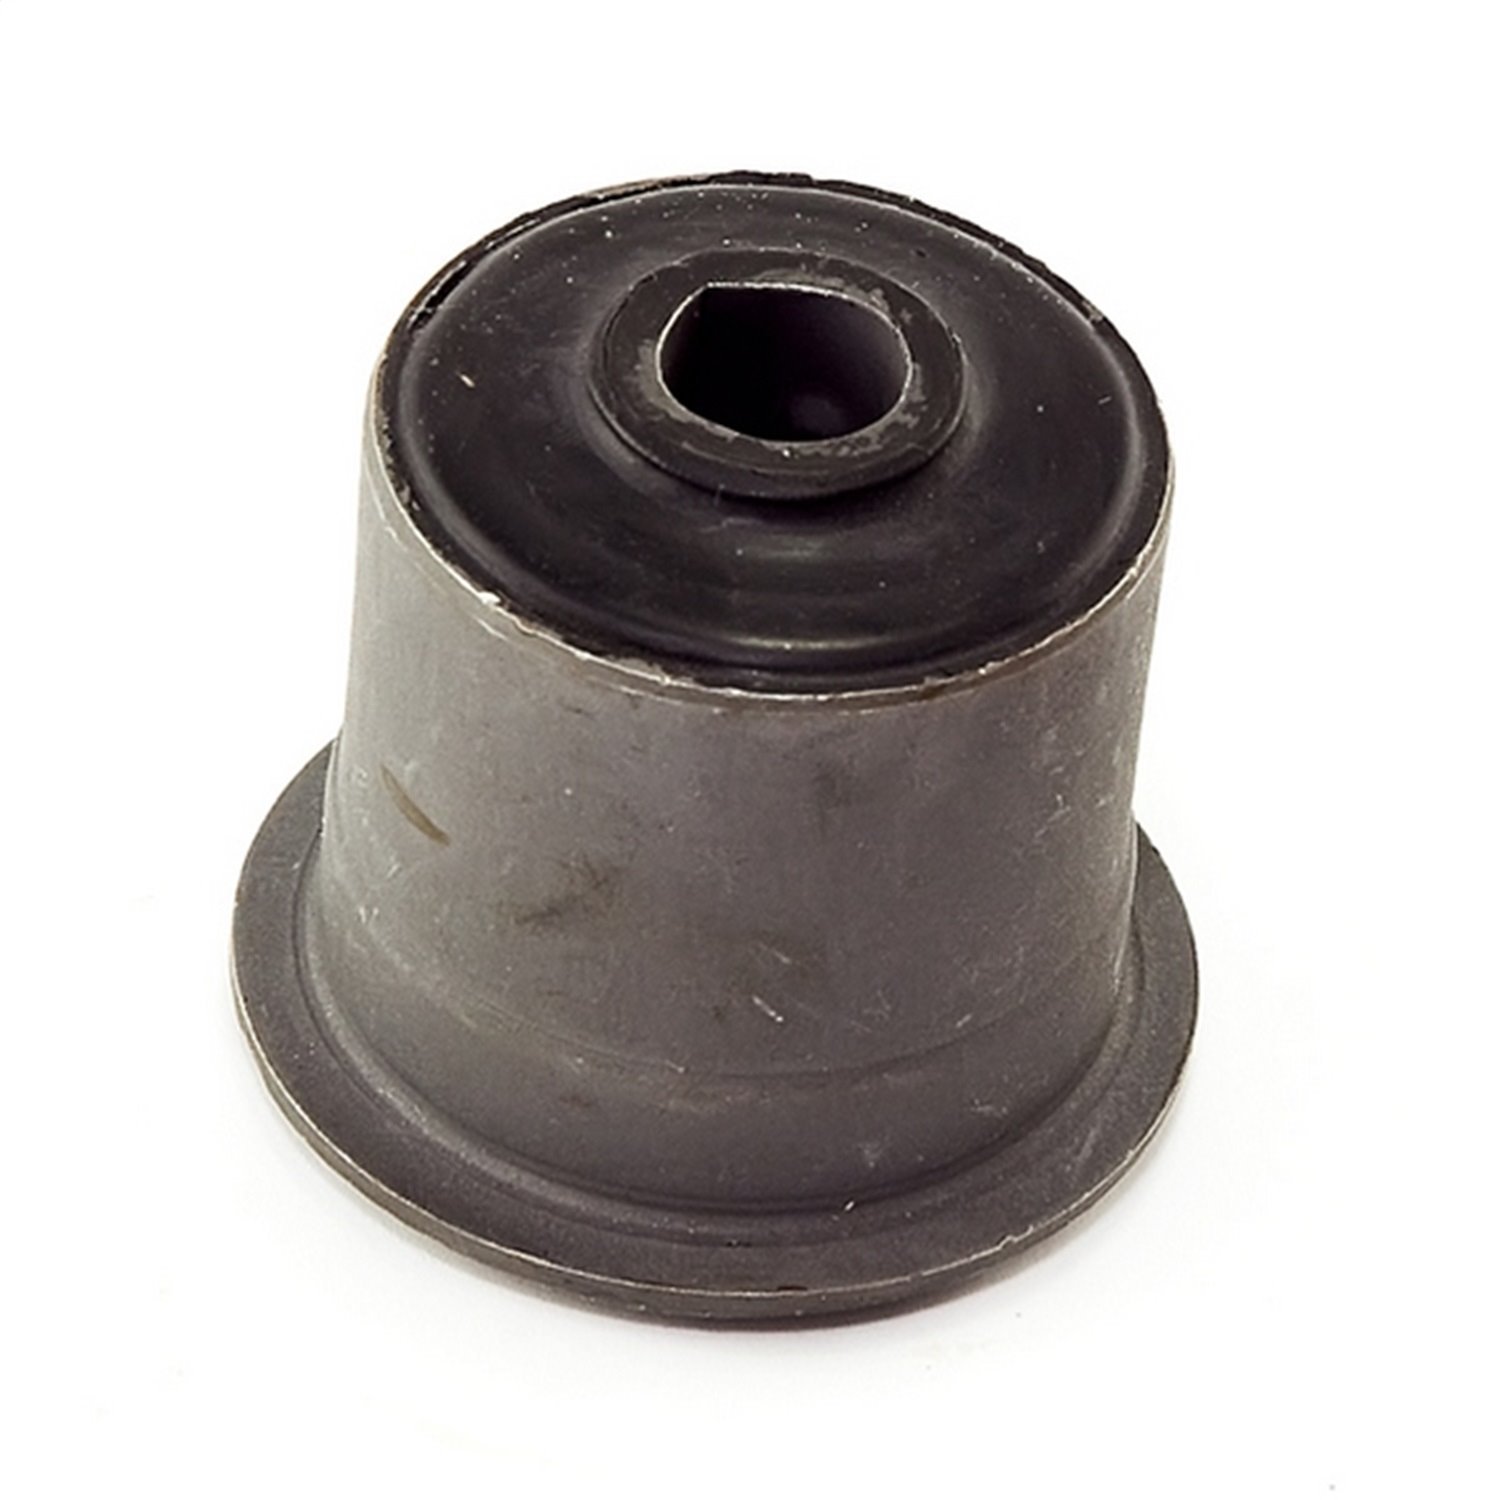 This upper control arm bushing from Omix-ADA fits